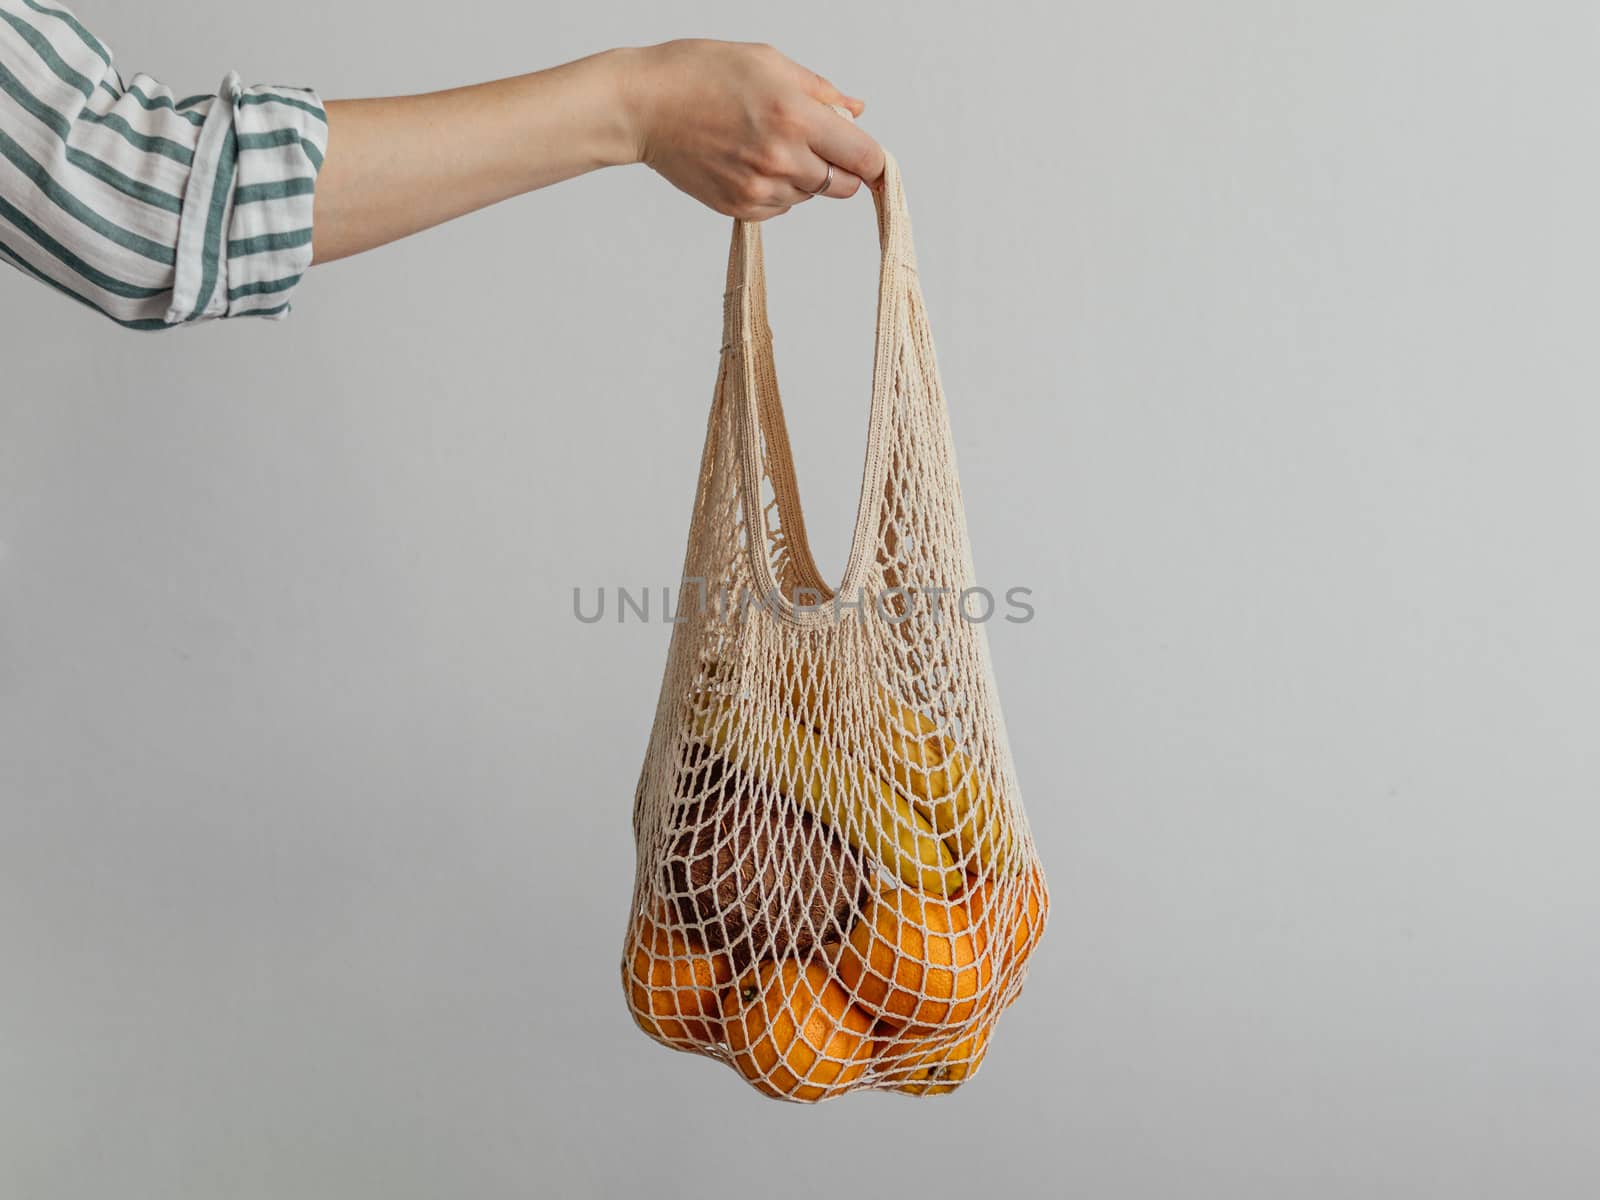 Mesh bag with fruits in female hand. Stylish young woman hand hold mesh shopping bag on light gray wall. Modern reusable shopping, zero waste concept.